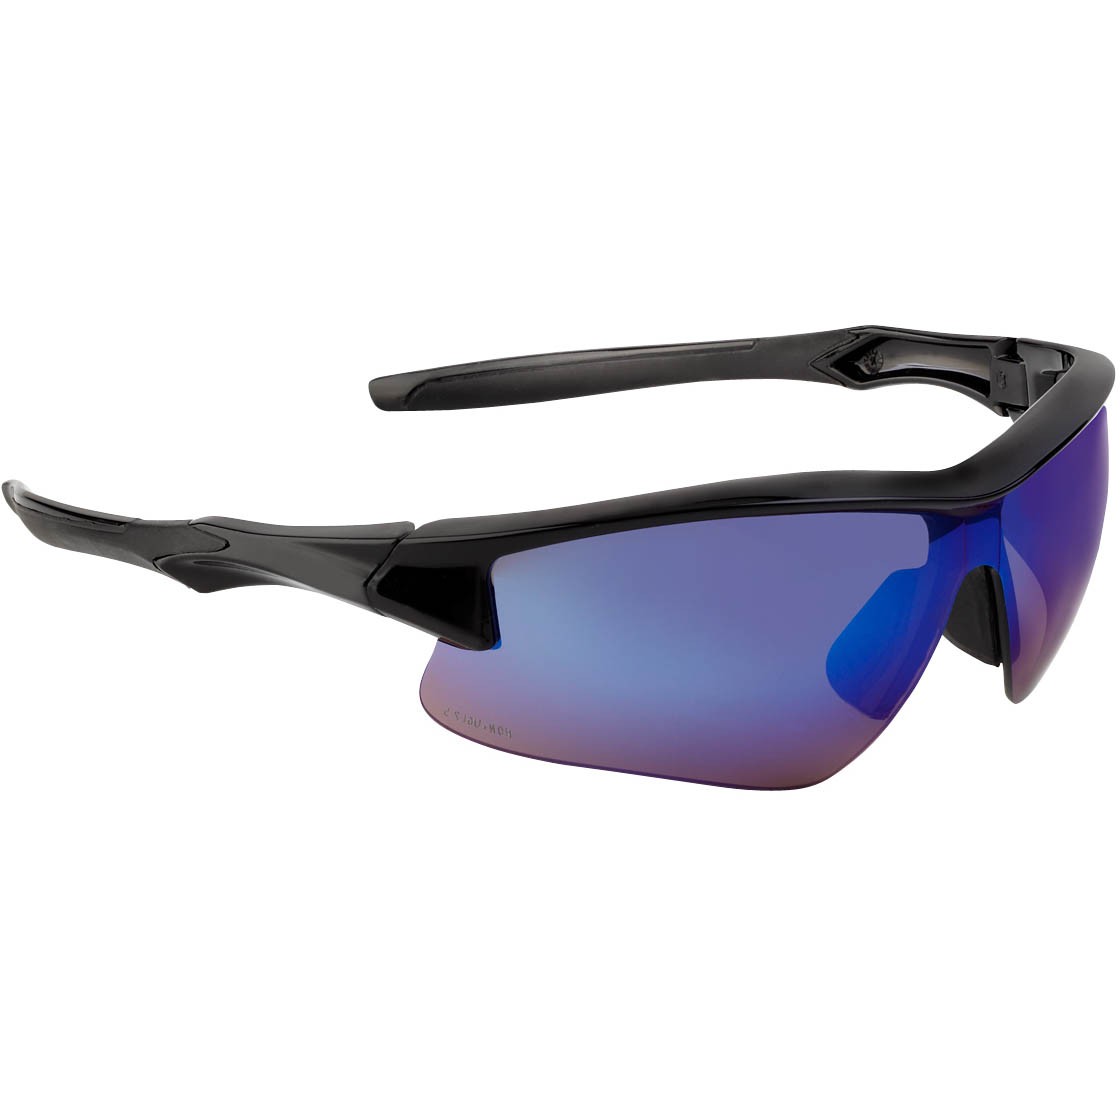 Howard Leight by Honeywell Acadia Shooter's Safety Eyewear, Black Frame, Blue Mirror Lens with Scratch-Resistant Hardcoat Lens Coating - R-02218